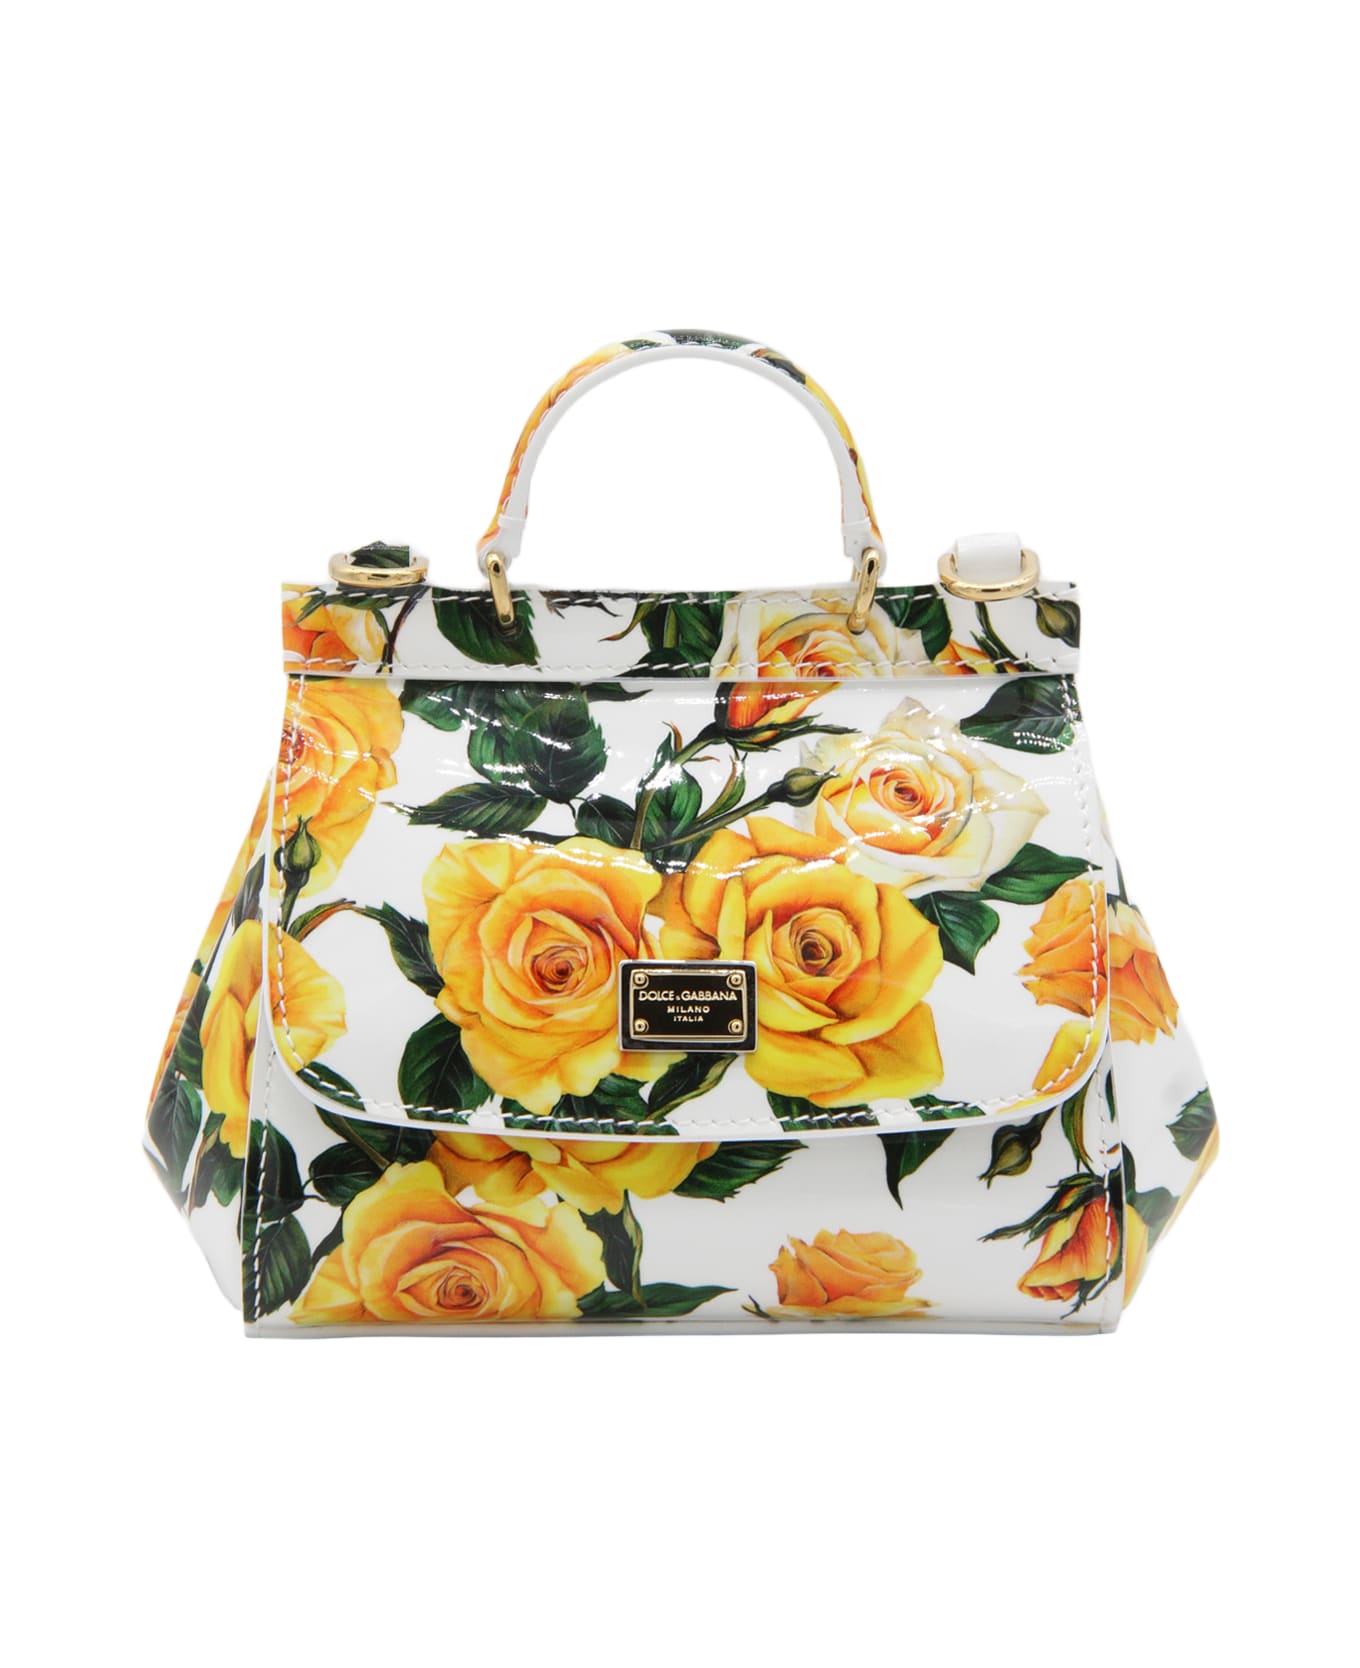 dolce & gabbana black pinstriped blazer White And Yellow Leather Sicily Tote Bag - ROSE GIALLE F.DO BIANCO